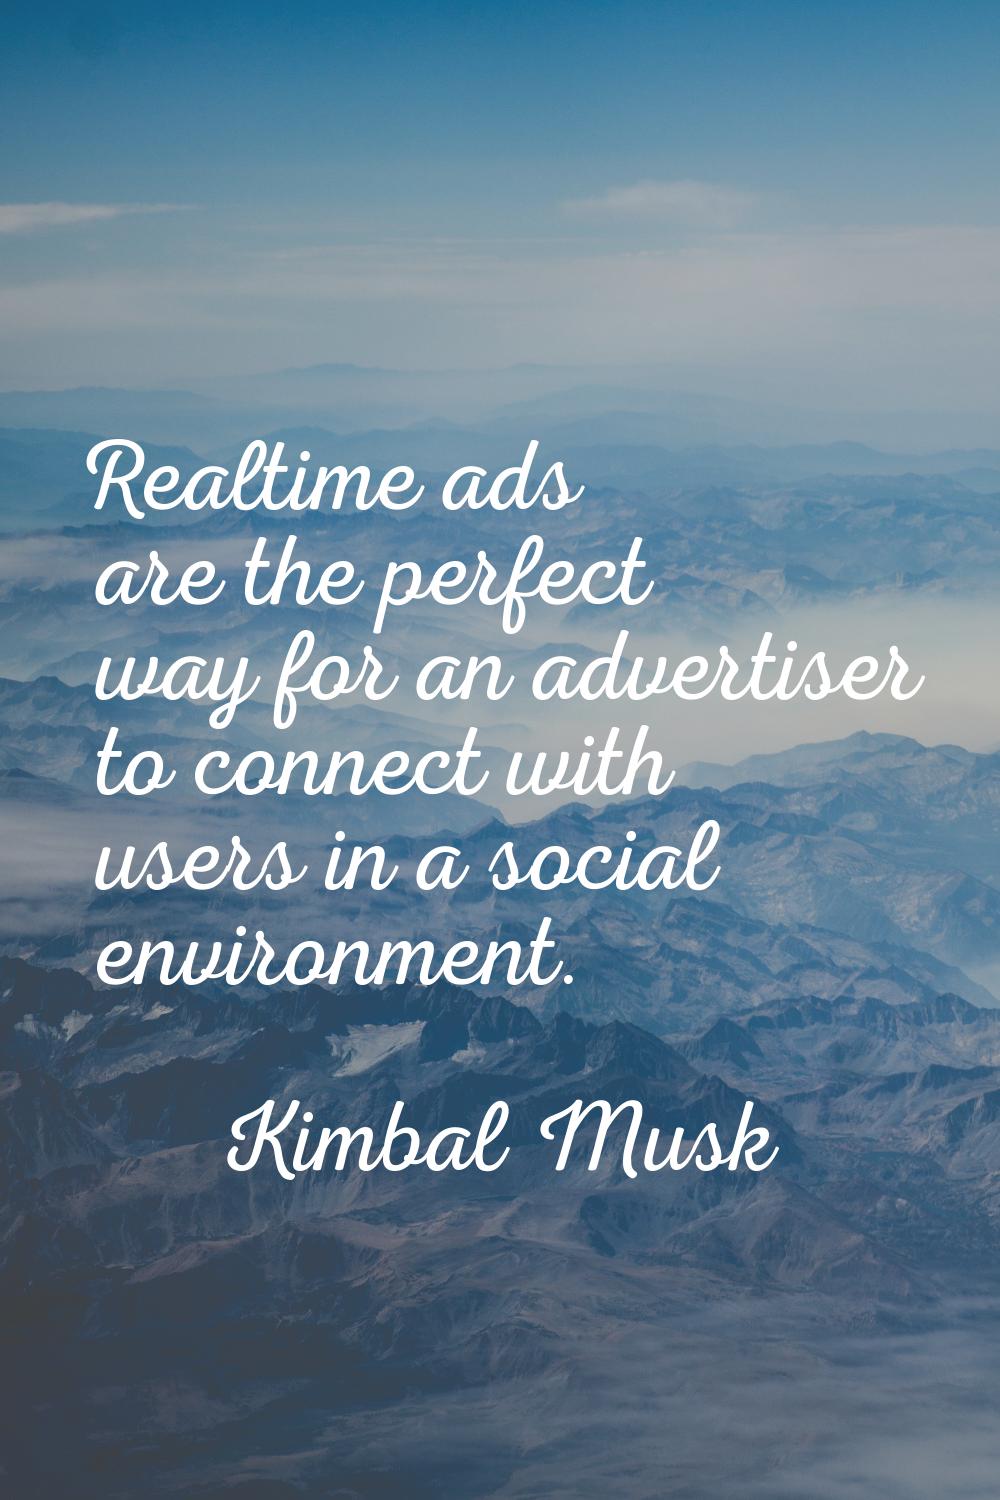 Realtime ads are the perfect way for an advertiser to connect with users in a social environment.